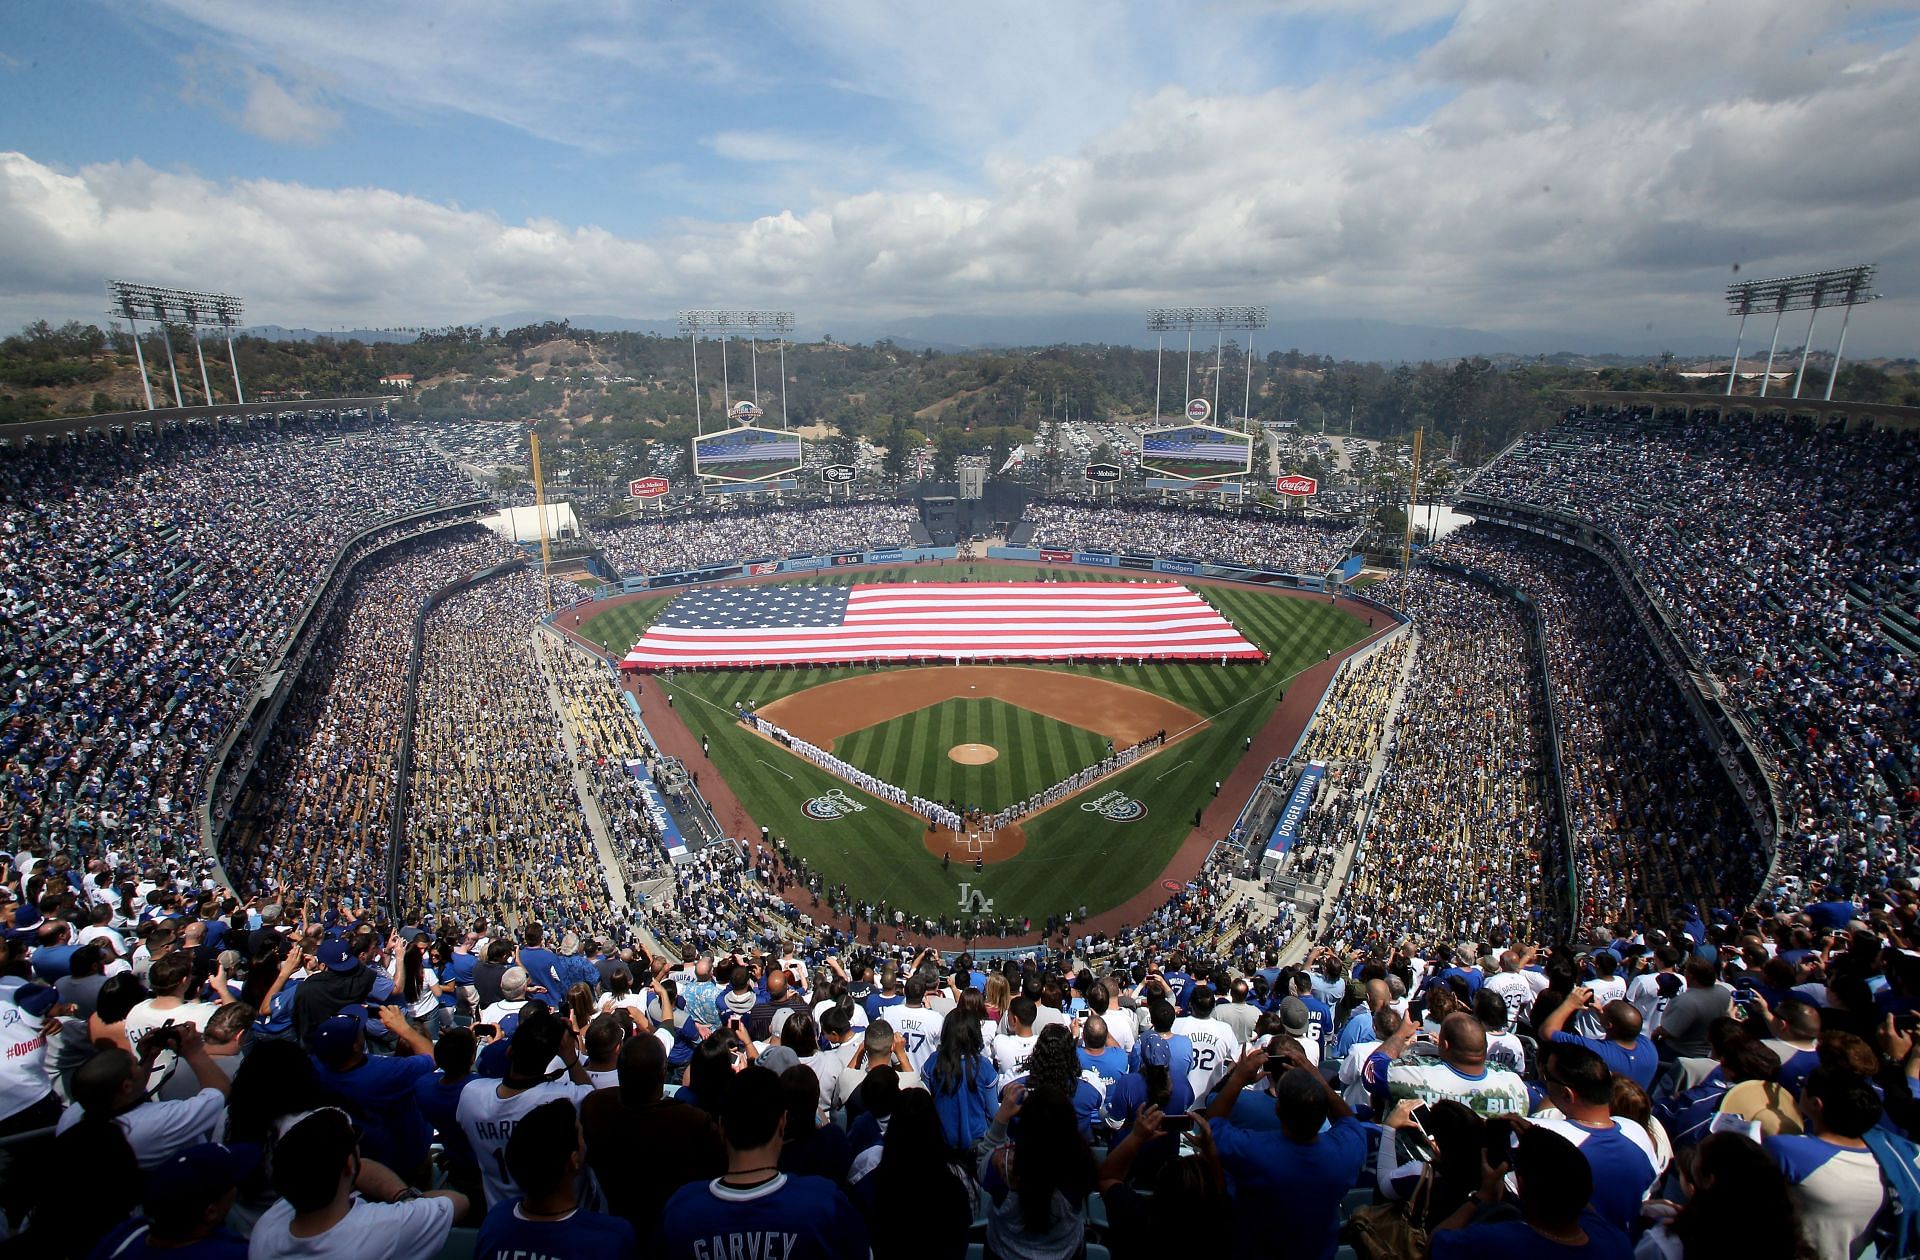 The Dodgers Stadium may get a new name